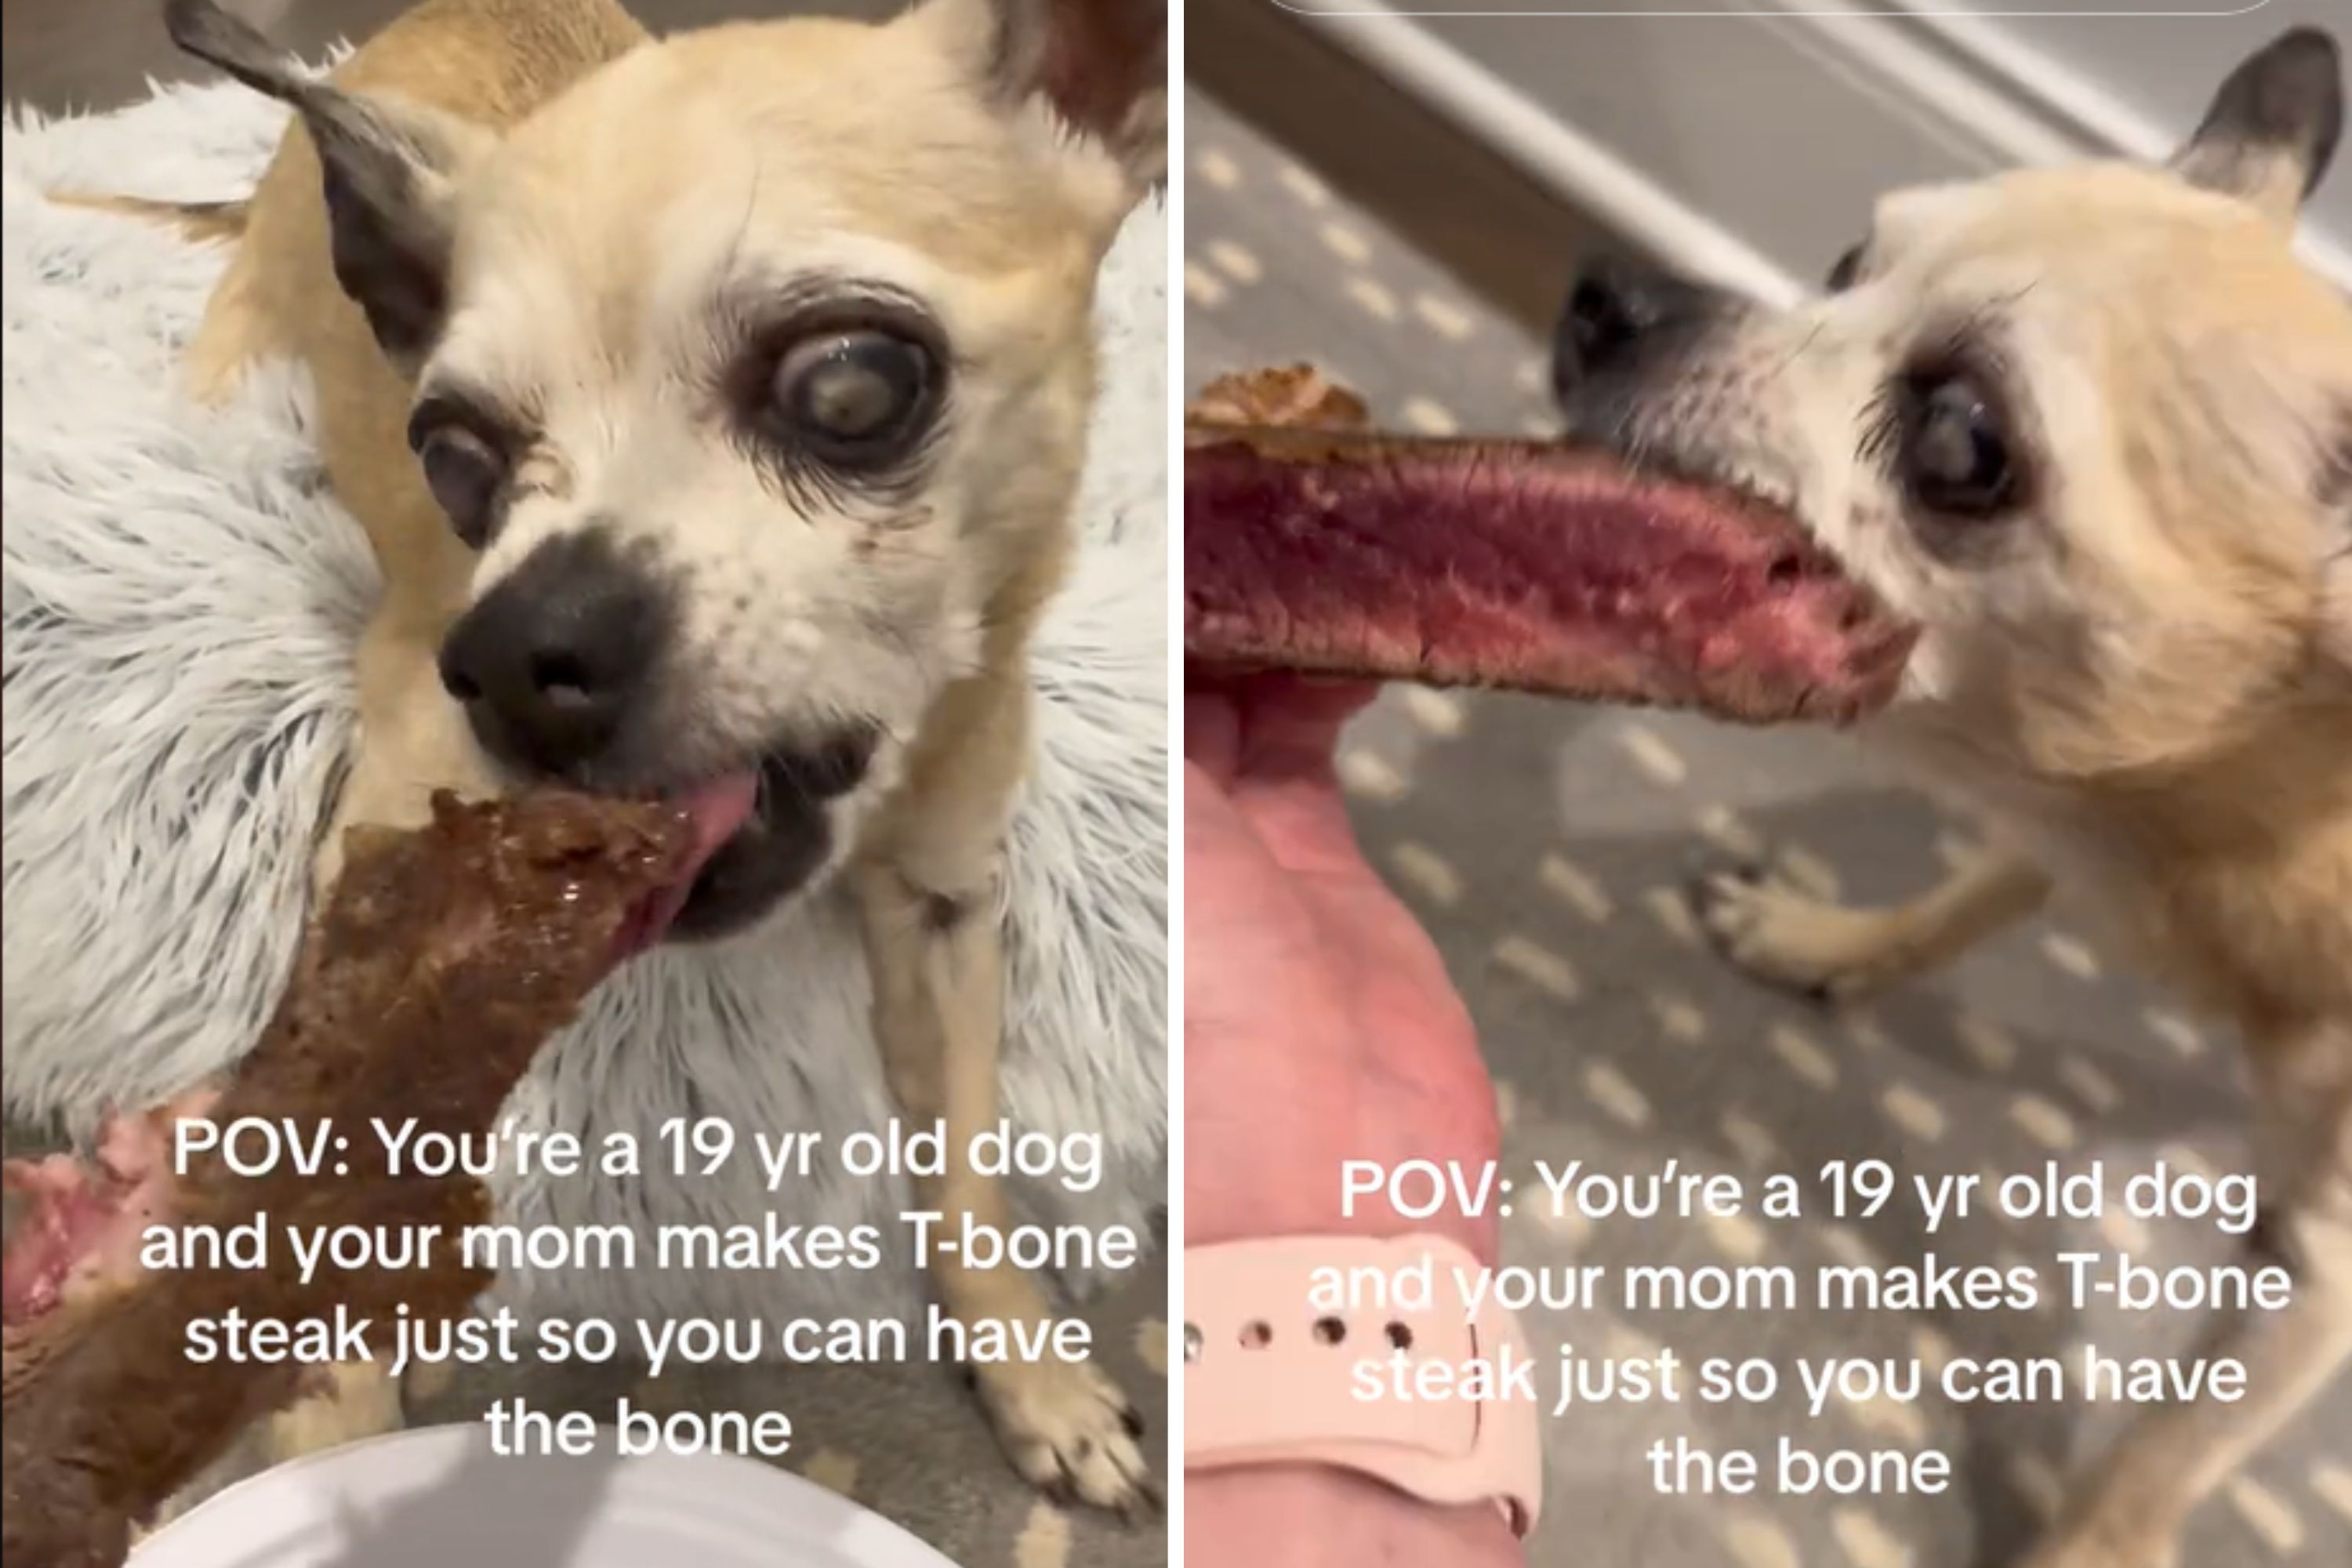 Dog, 19, earns T-bone, as at this point he “deserves all the treats”